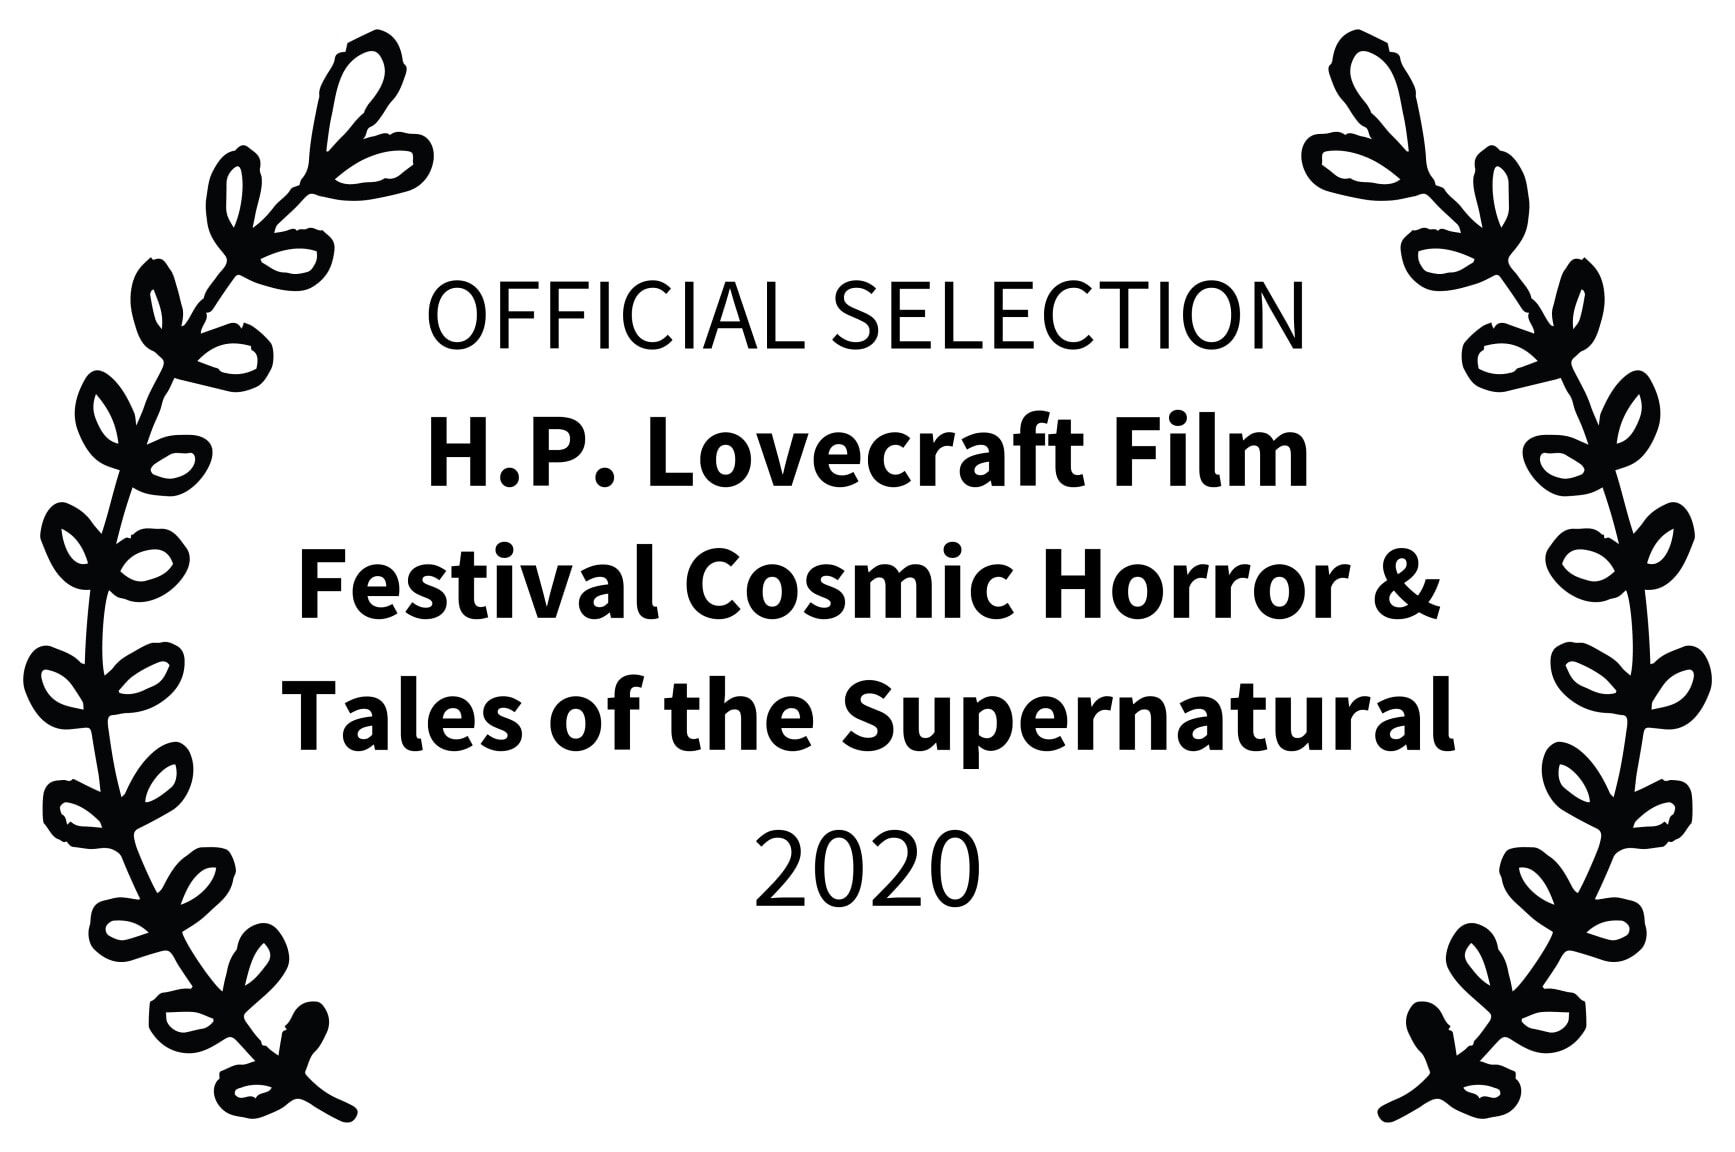 OFFICIAL SELECTION - H.P. Lovecraft Film Festival Cosmic Horror  Tales of the Supernatural - 2020